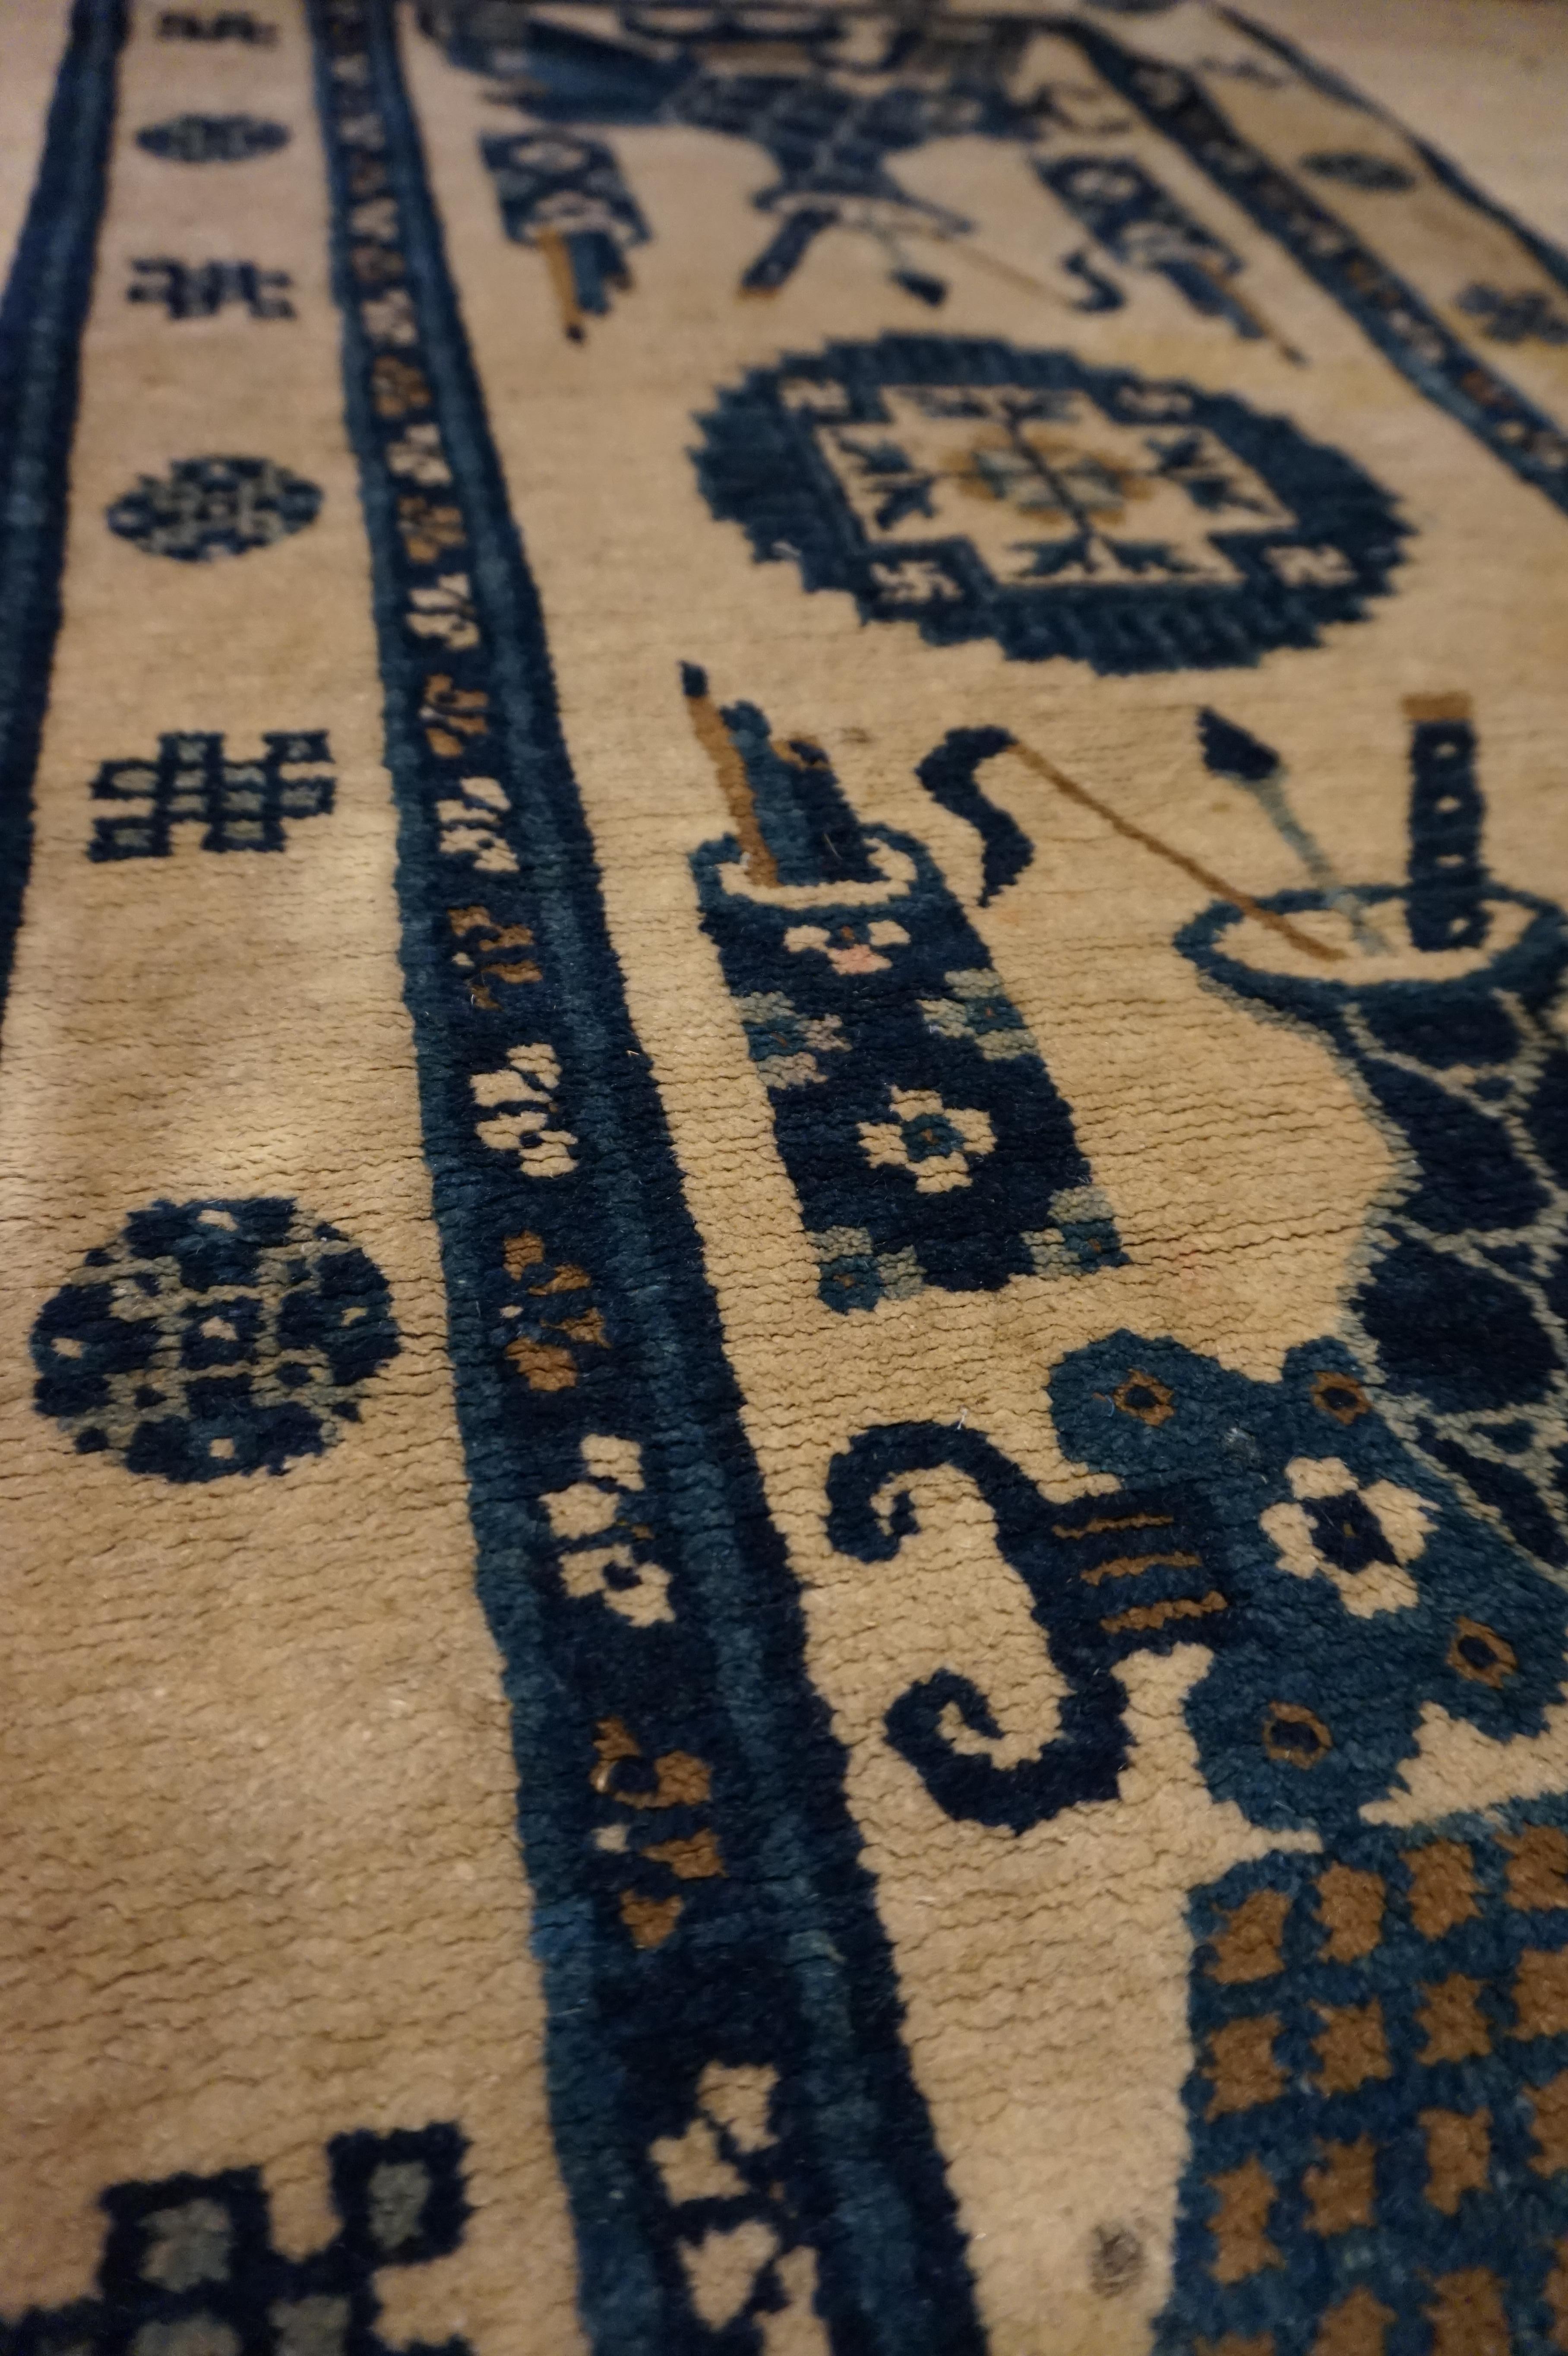 Chinese Export Early 20th C. Blue & White Chinese Rug Depicting Scholar's Brush Pots & Objects